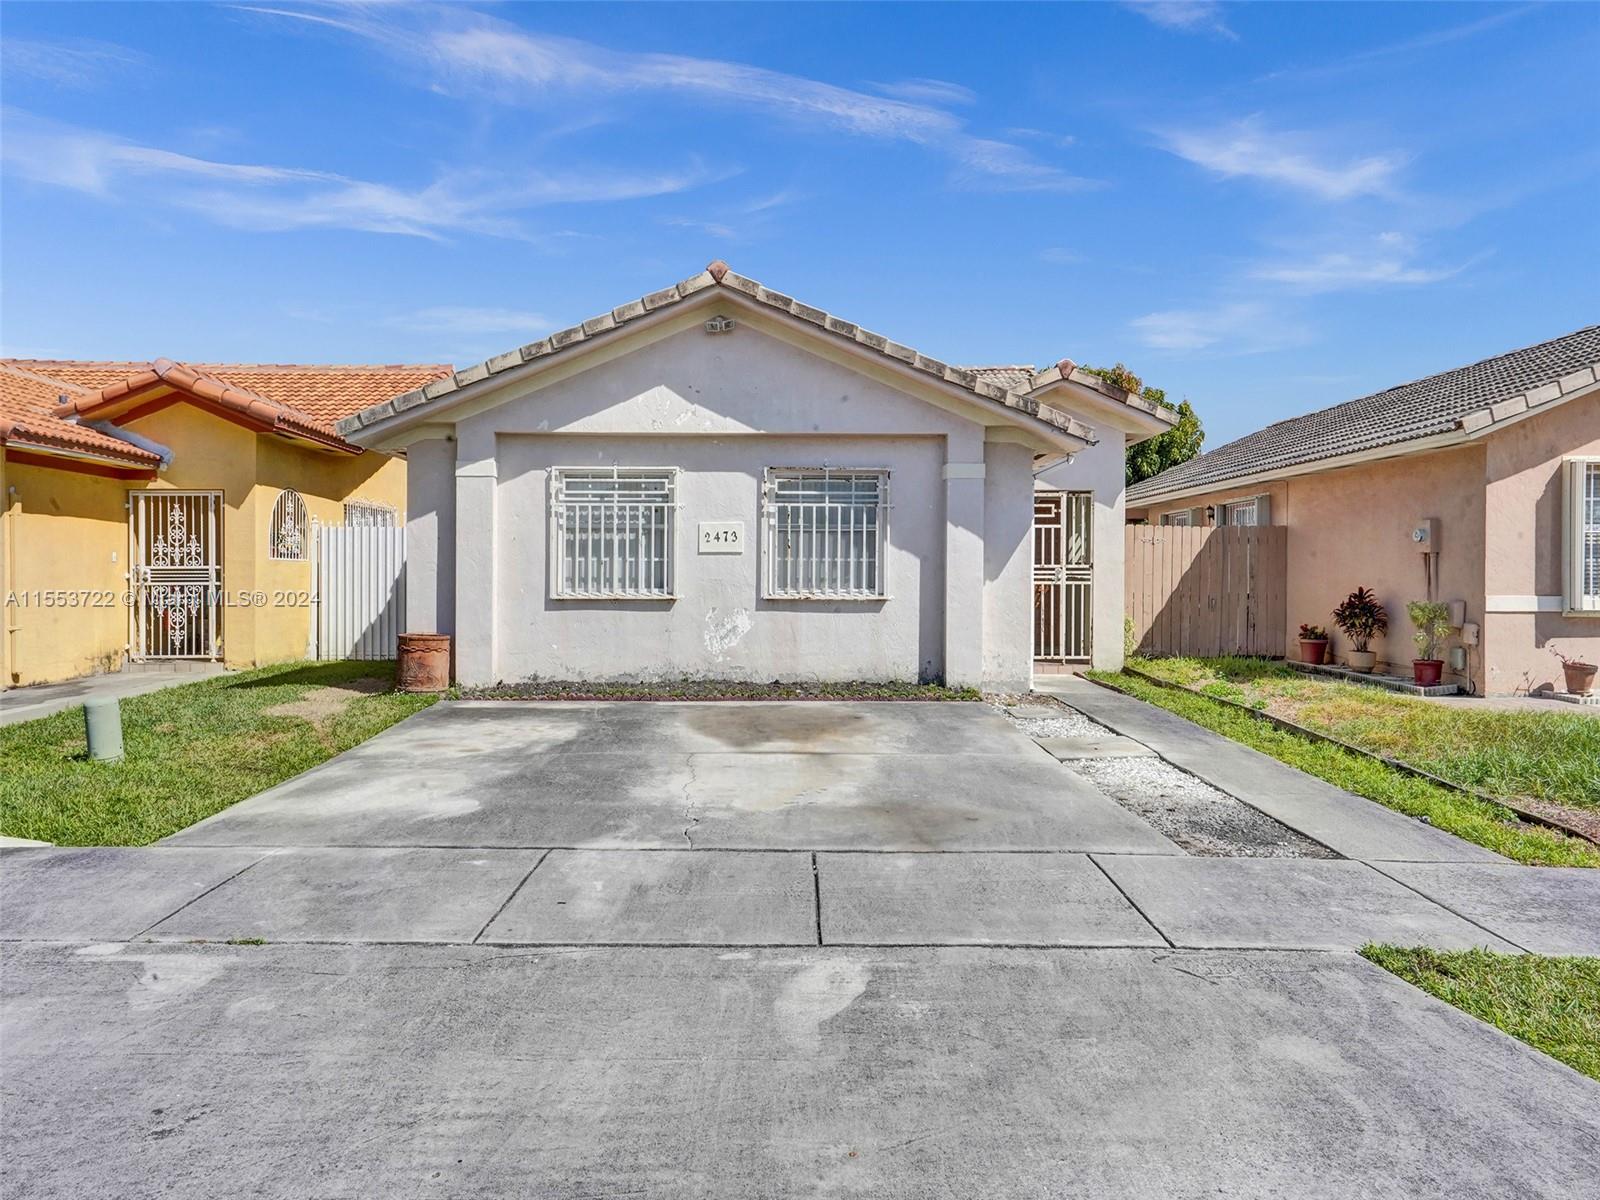 2473 W 72nd Pl, Hialeah, Florida 33016, 3 Bedrooms Bedrooms, ,2 BathroomsBathrooms,Residential,For Sale,2473 W 72nd Pl,A11553722